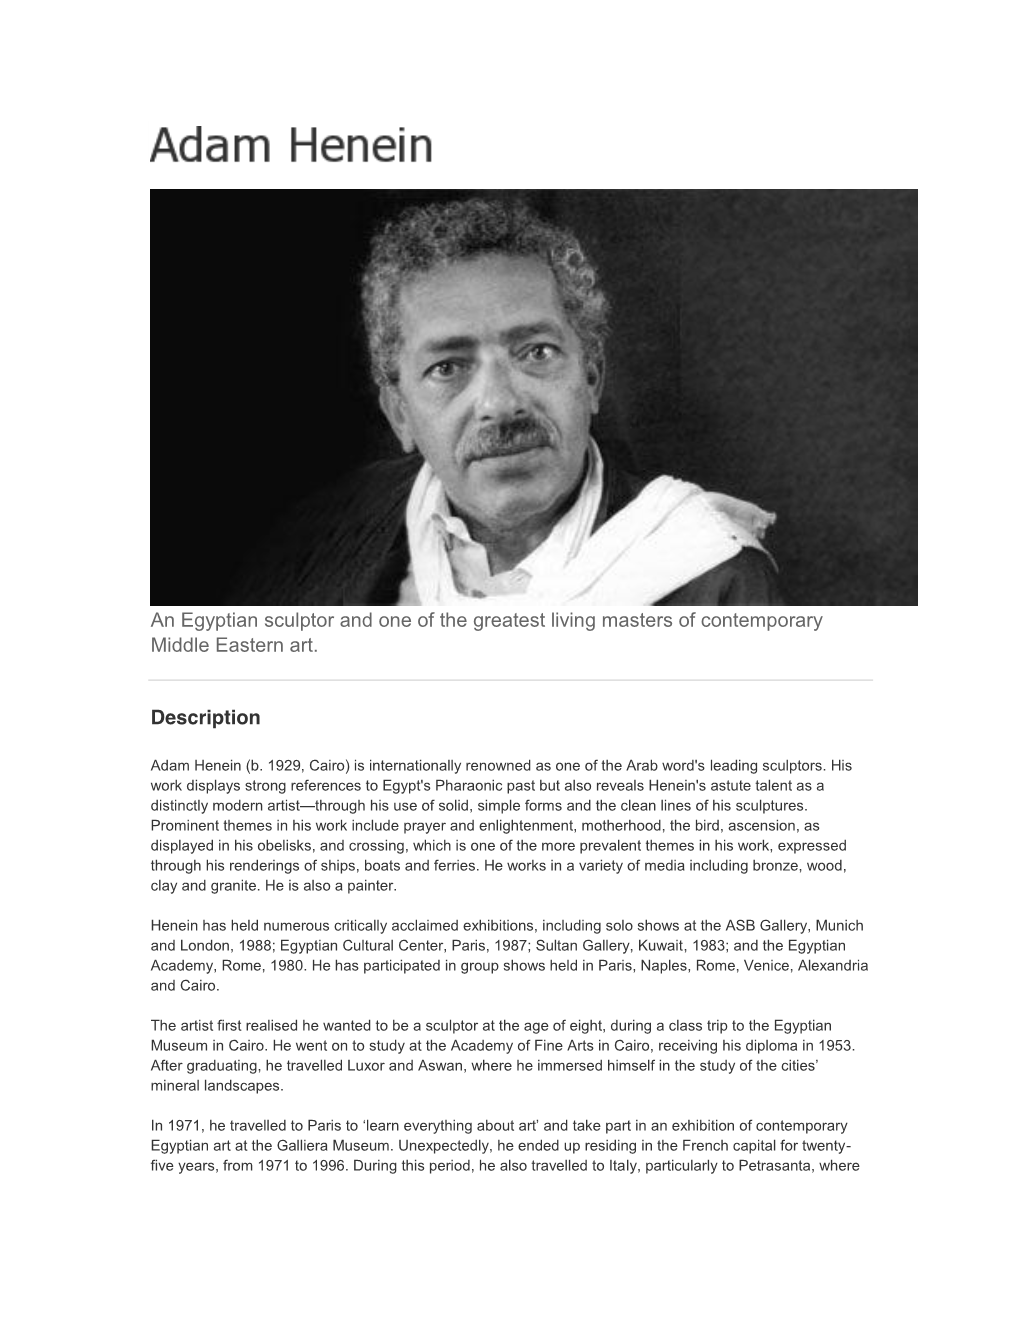 An Egyptian Sculptor and One of the Greatest Living ... -.:: ADAM HENEIN